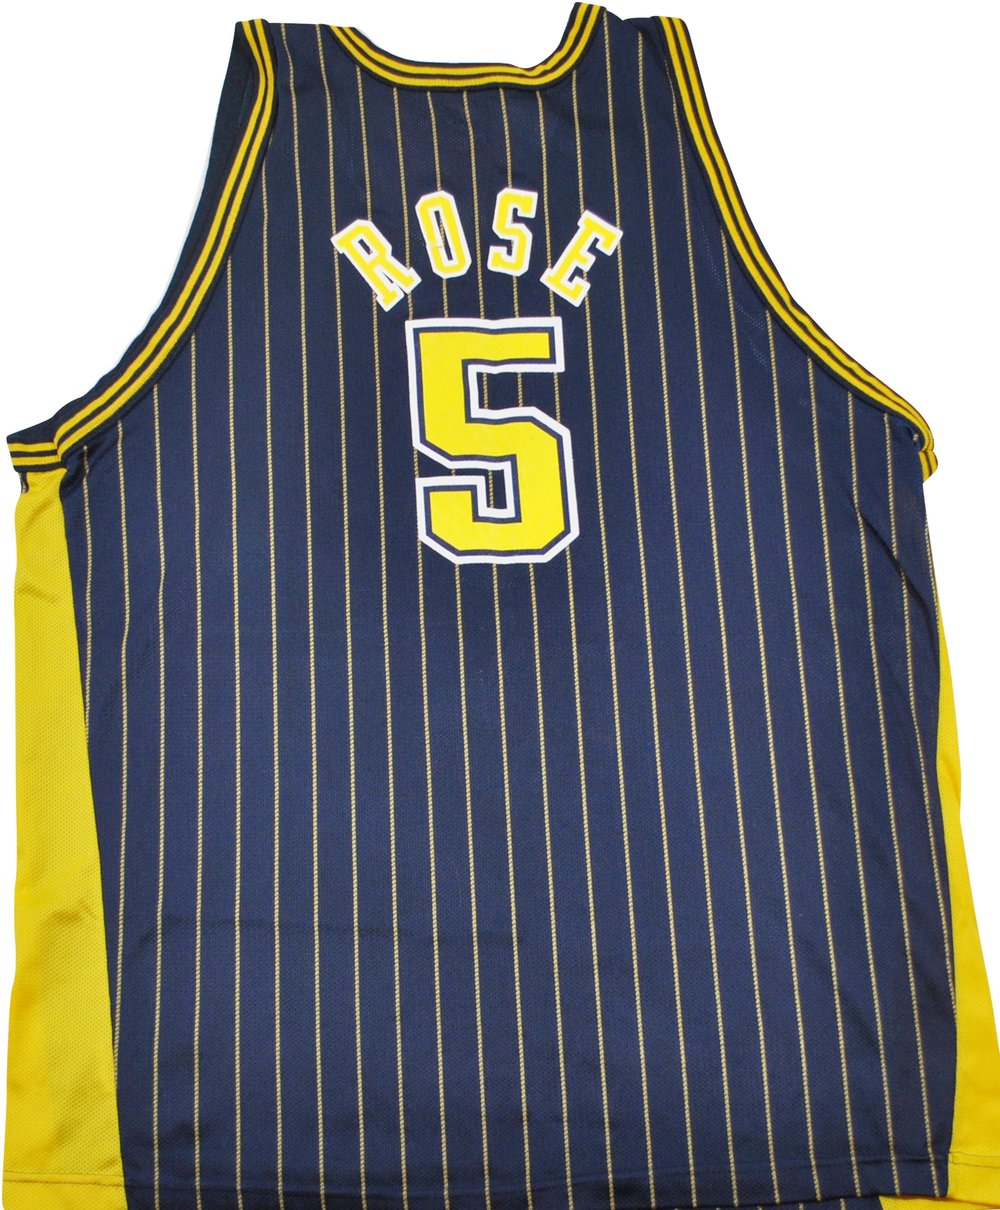 Big & Tall Men's Jalen Rose Indiana Pacers Nike Swingman Gold Jersey -  Statement Edition